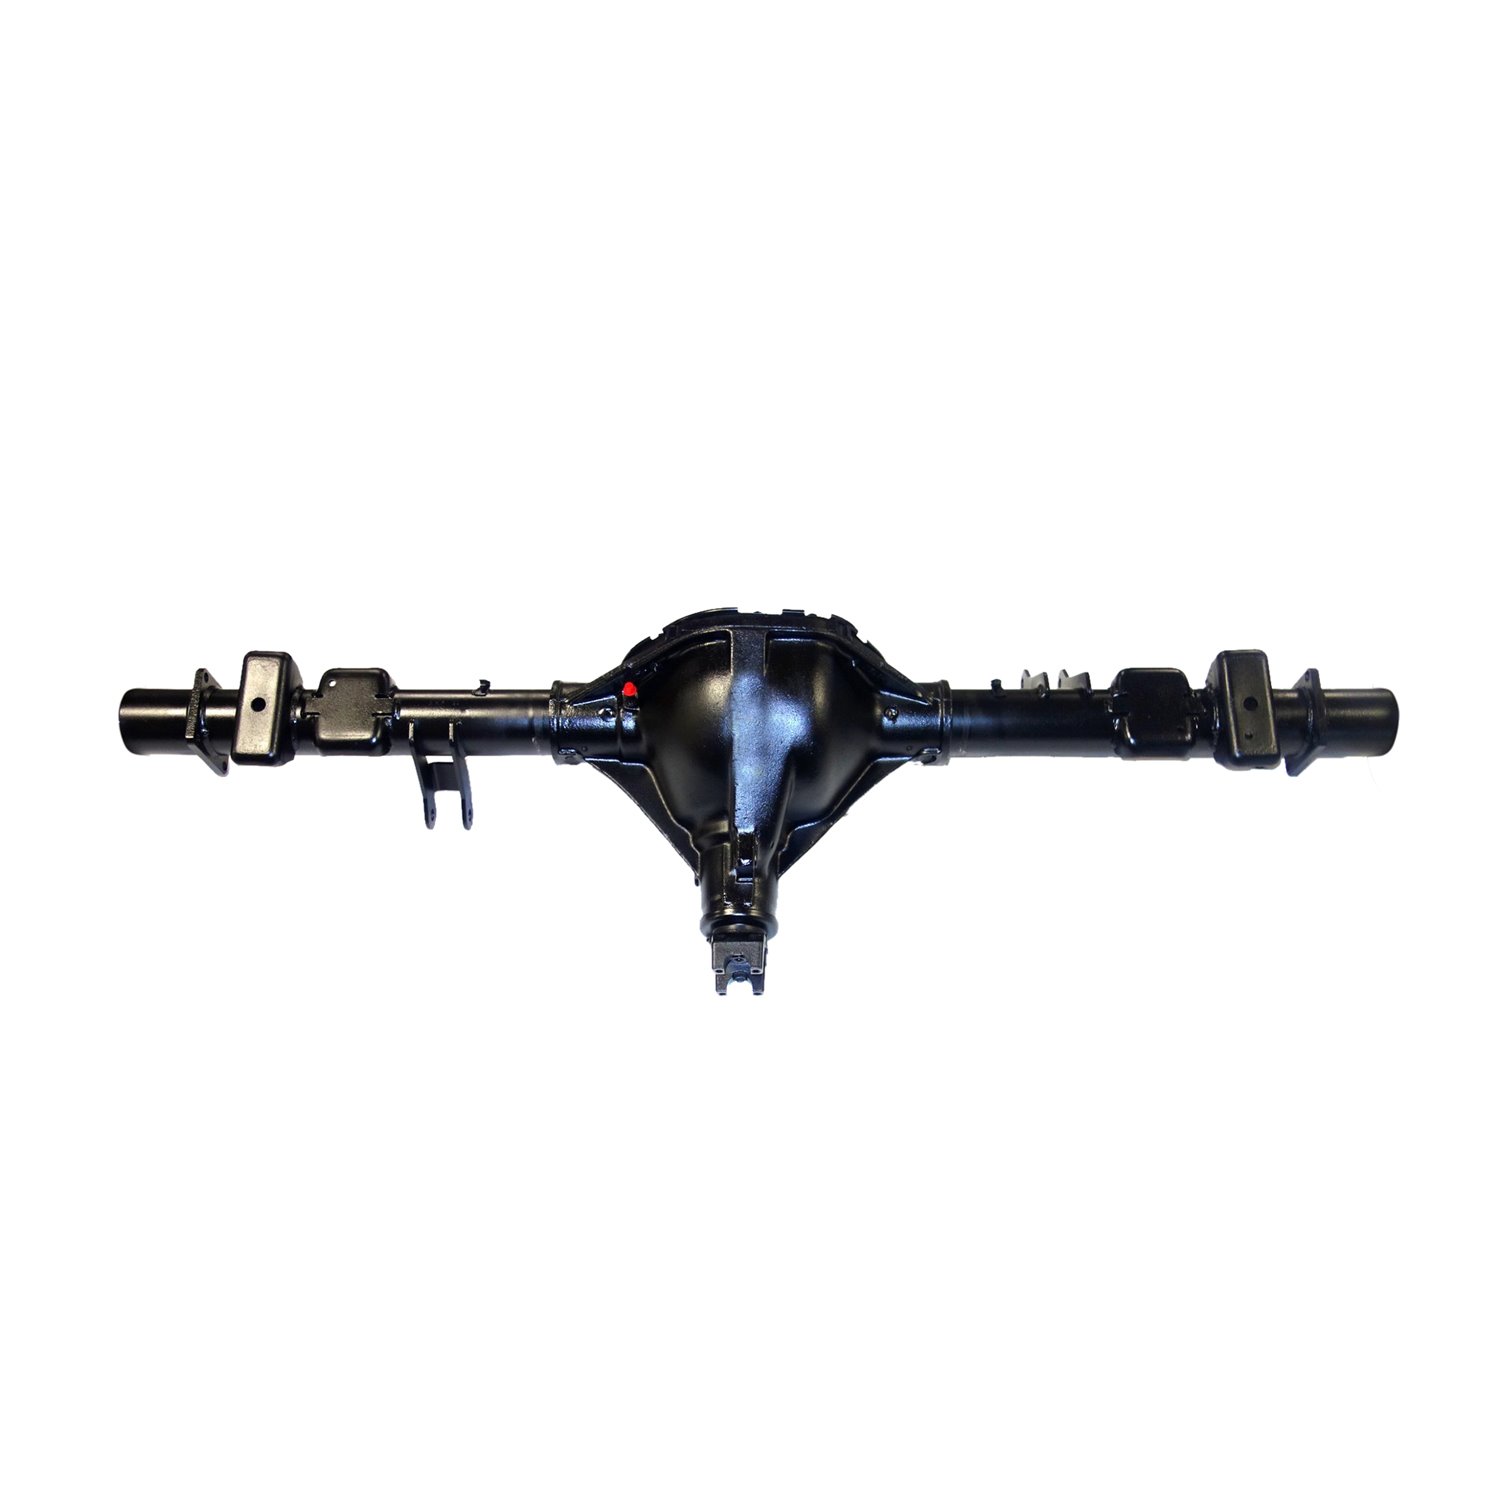 Remanufactured Complete Axle Assembly for GM 9.5" 01-05 GMC 1500 3.42 Ratio